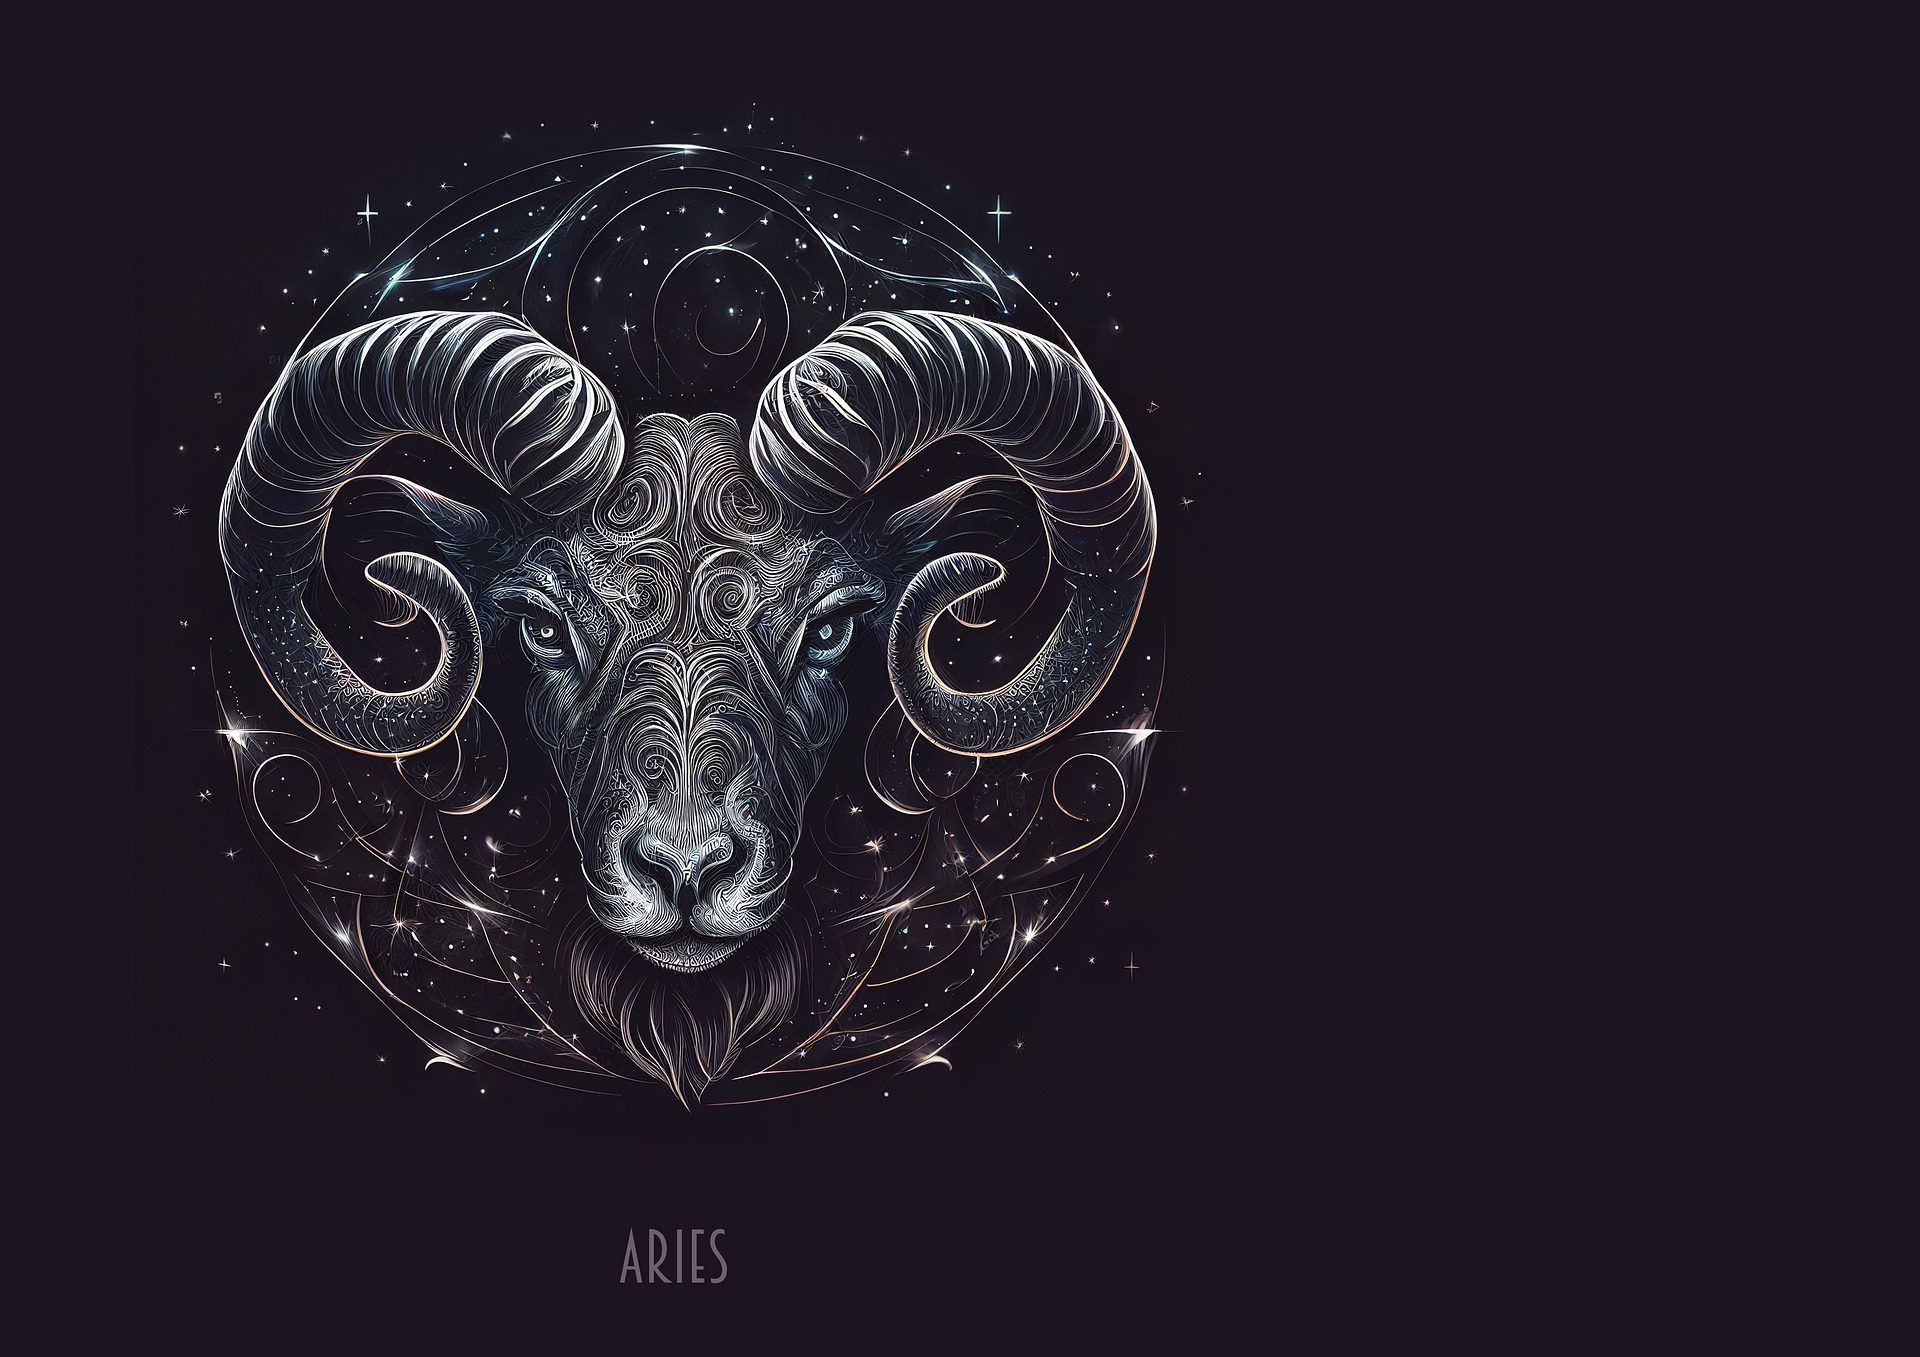 15 Fun Facts About The Zodiac Sign Aries Discover Walks Blog